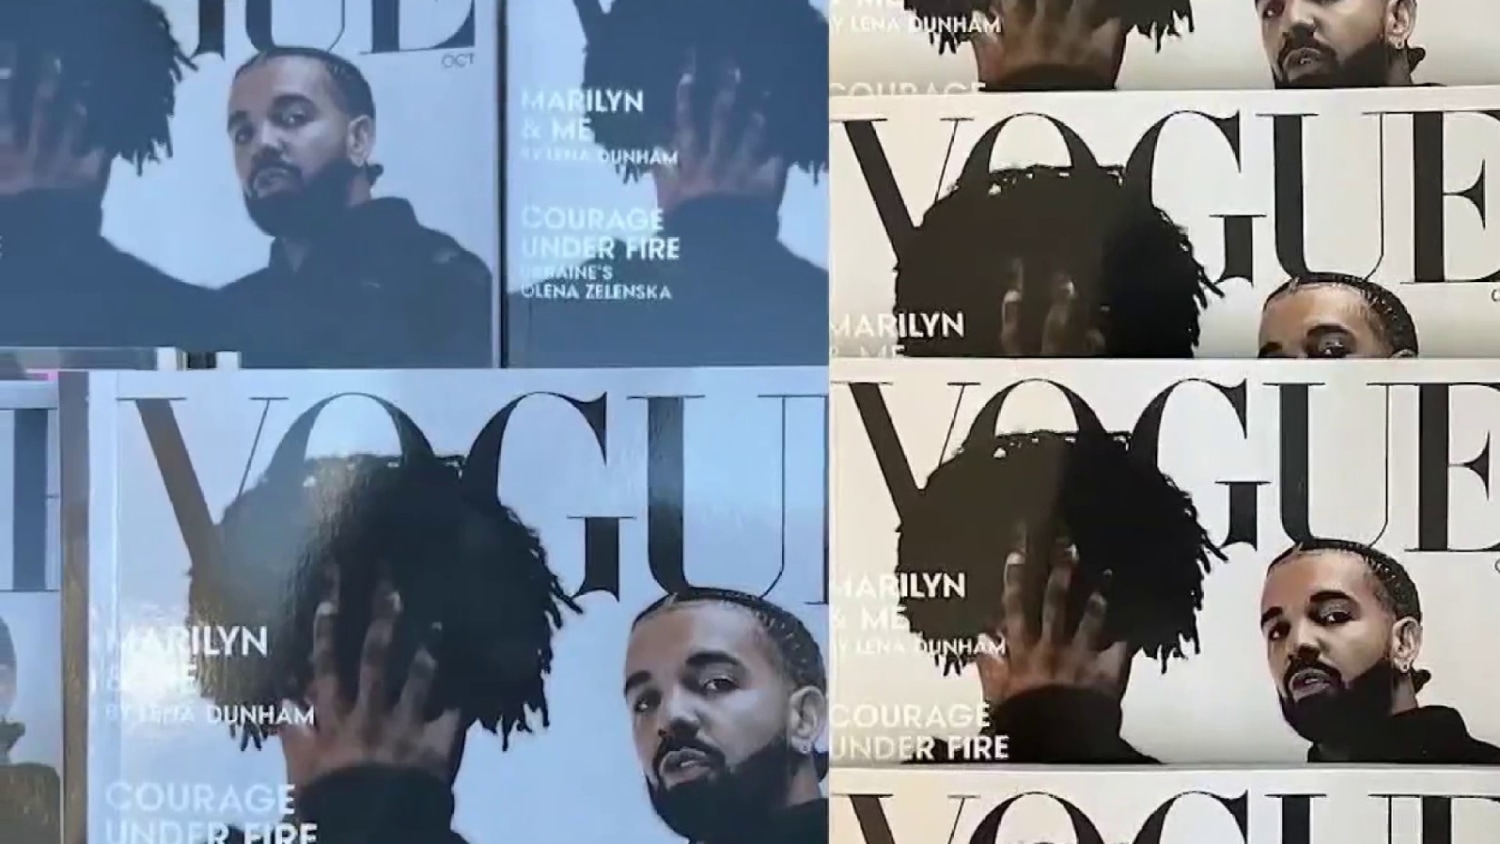 Drake, 21 Savage Are Sued for Using 'Vogue' Name to Promote Album